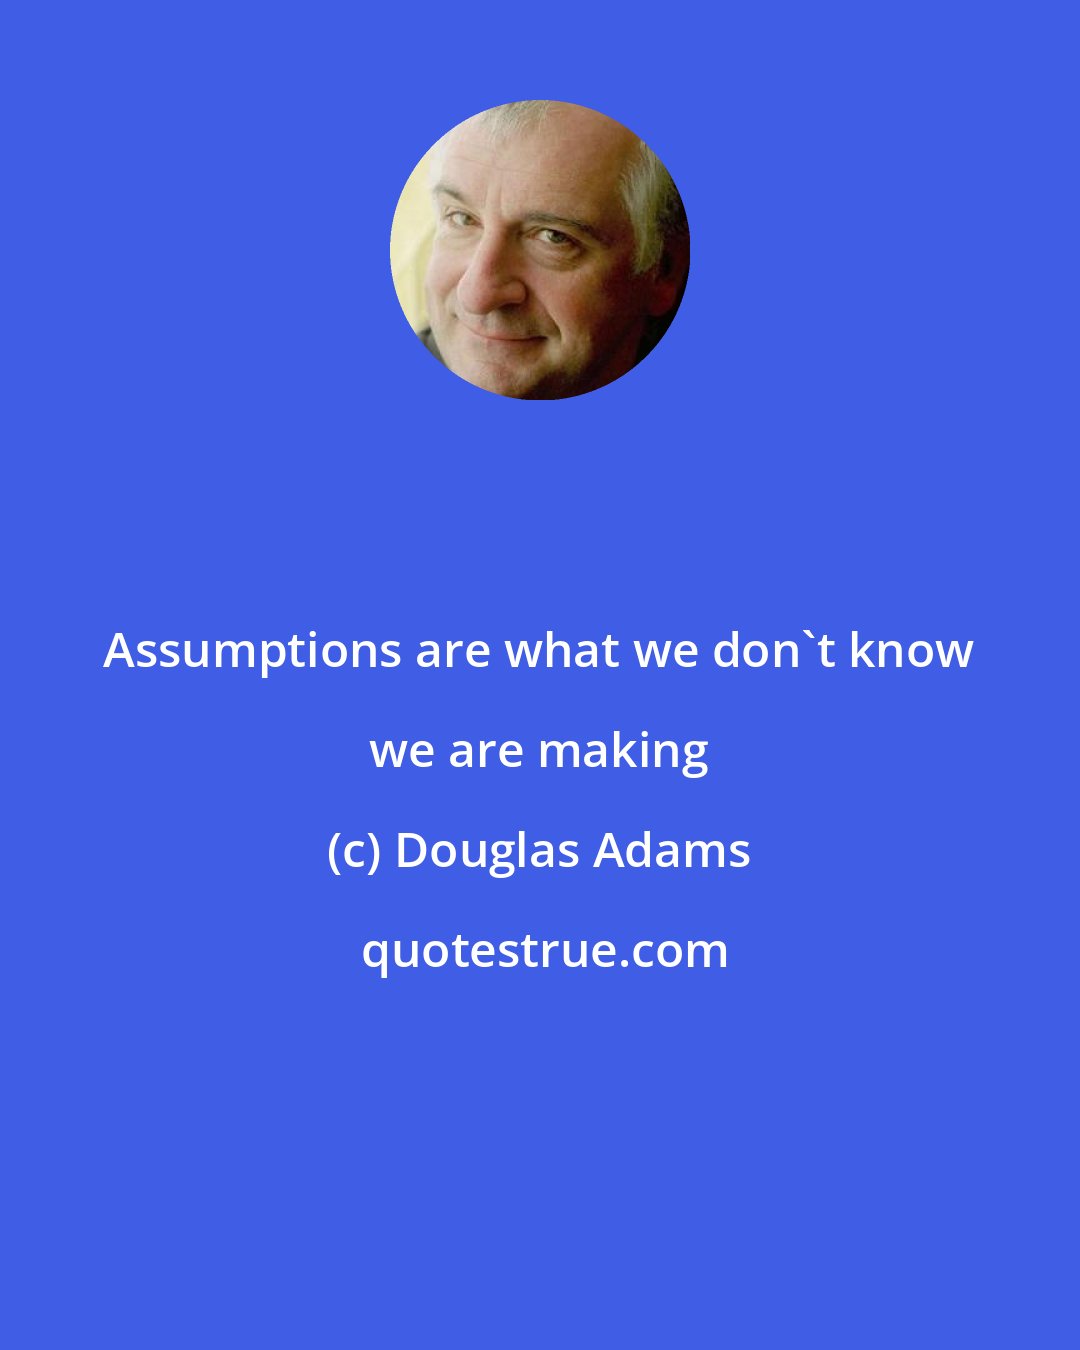 Douglas Adams: Assumptions are what we don't know we are making